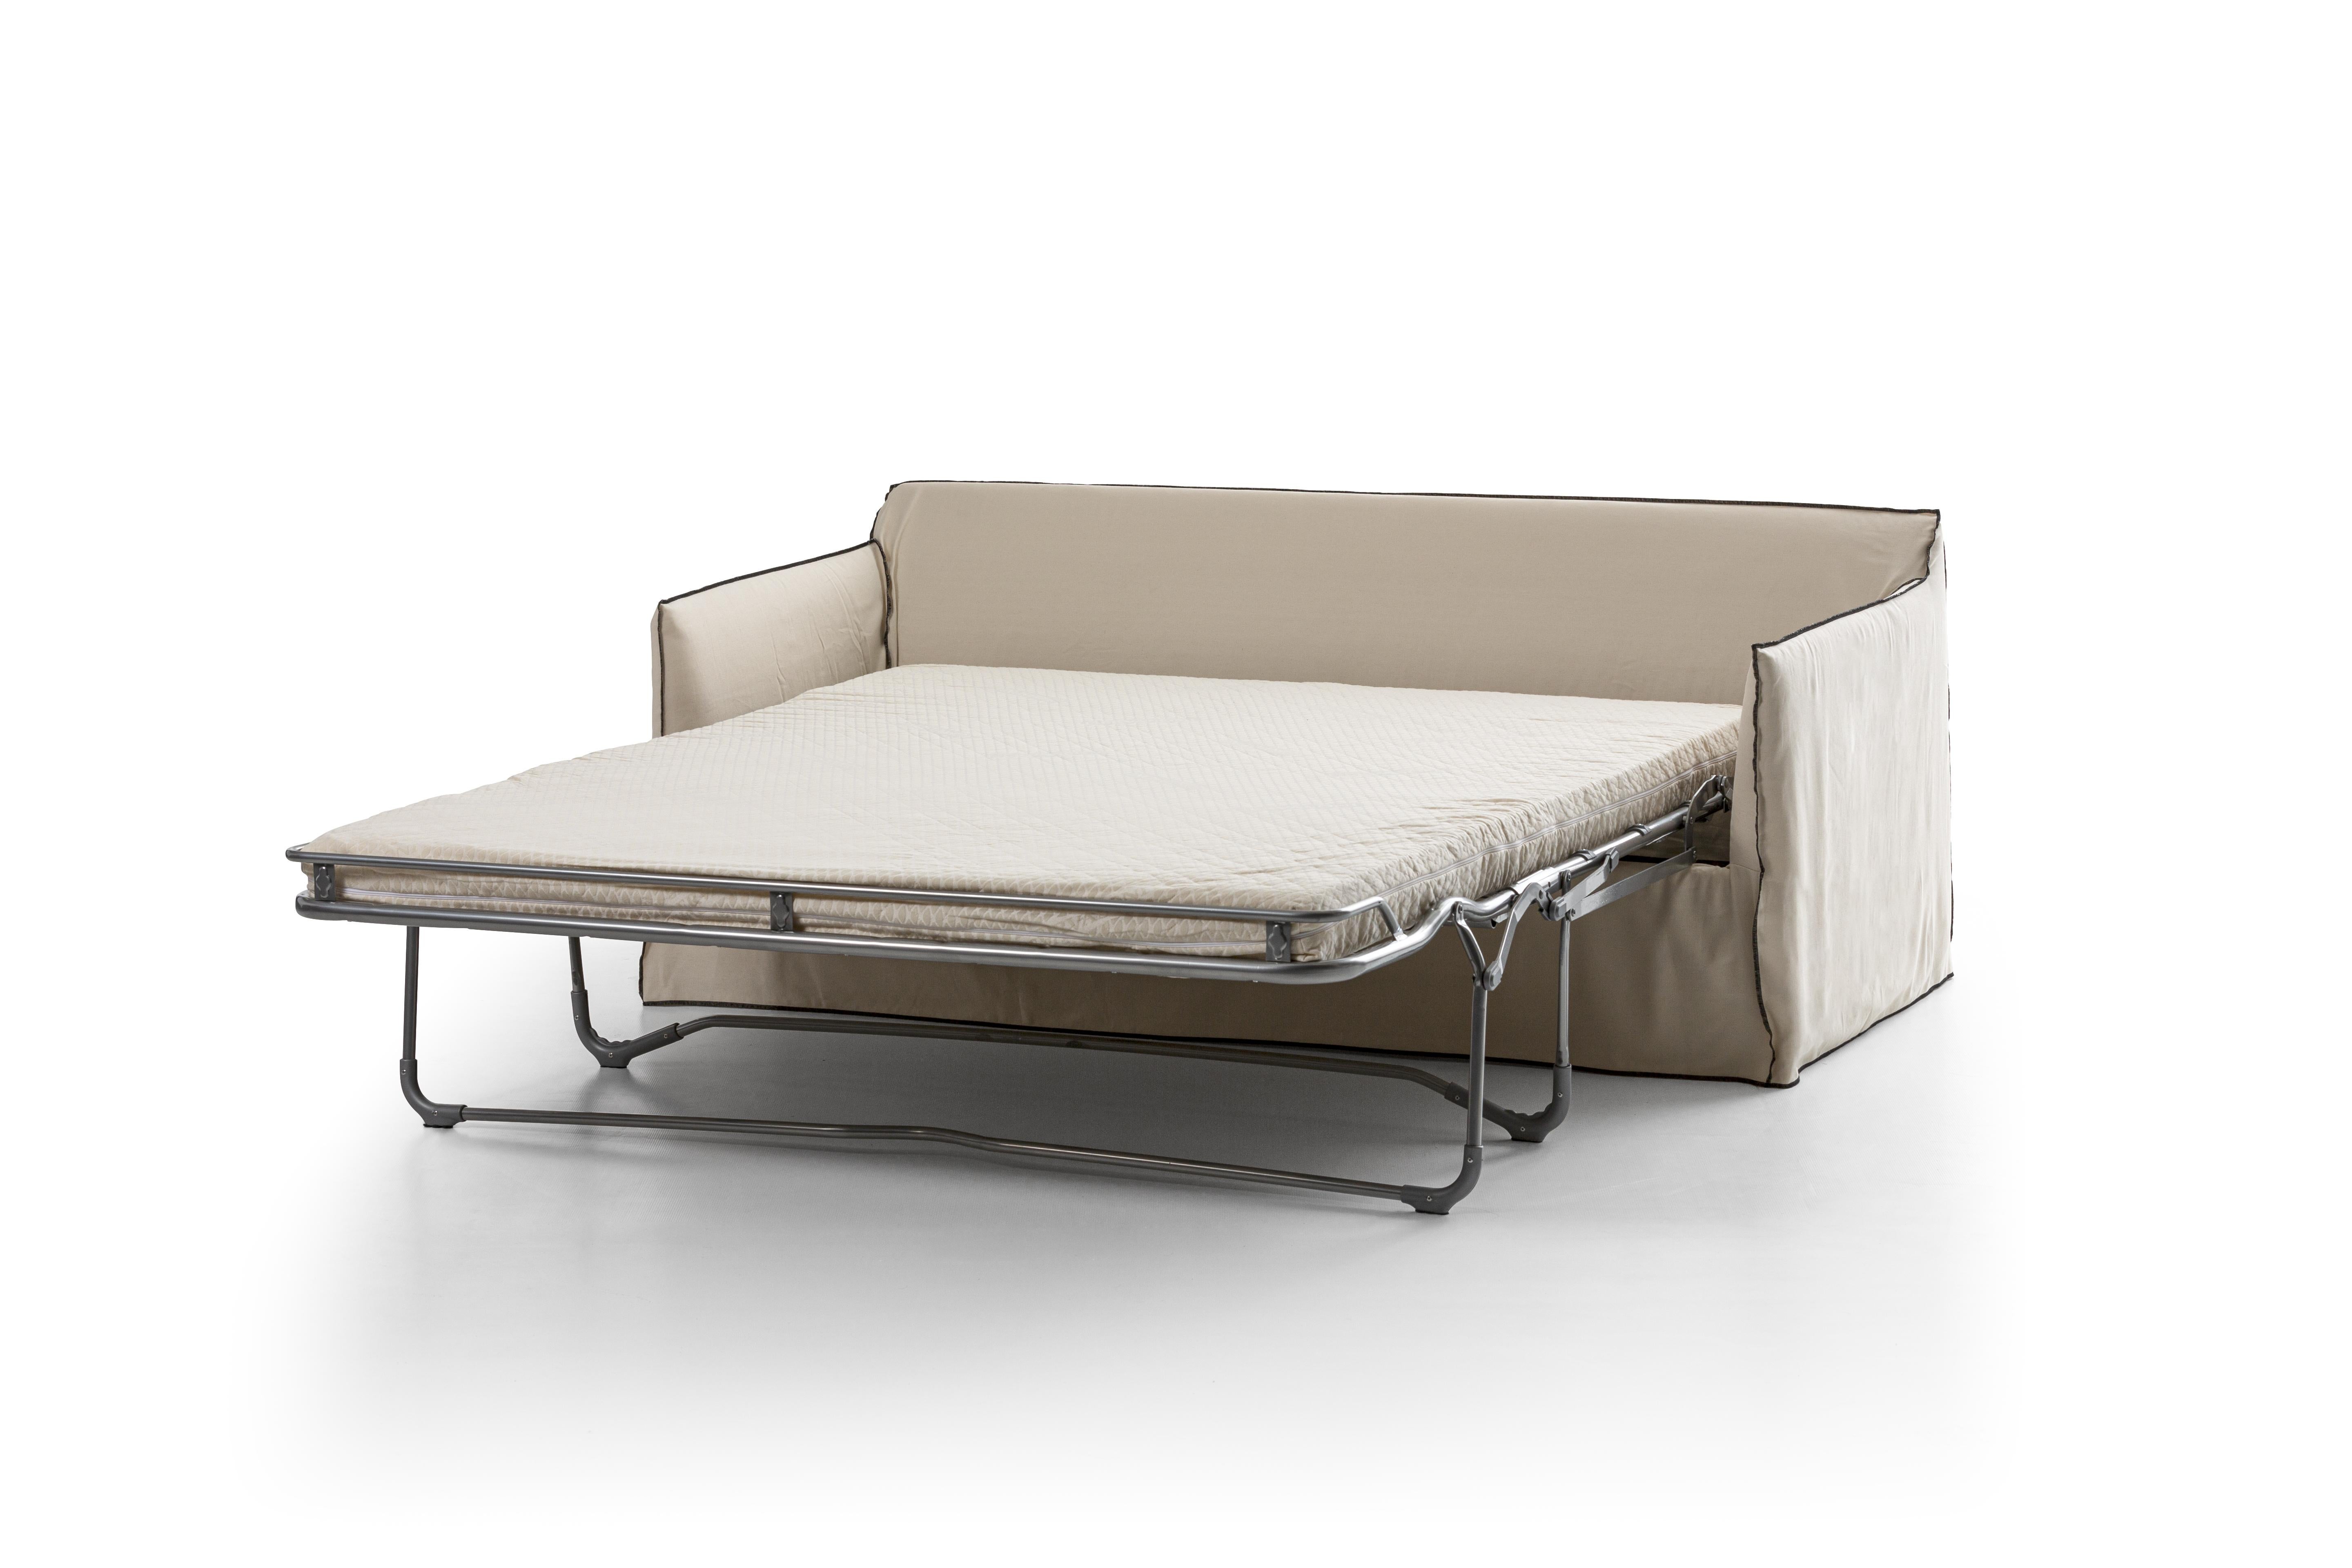 Gervasoni Ghost 15 sofa bed in white linen upholstery by Paola Navone

Sofa-bed upholstered with polyurethane foams, removable covers. Three back cushions 60 x 60 cm, two 50 x 50 cm. Folding metal frame. Polyurethane foam mattress 160 x 200 x 11 cm,